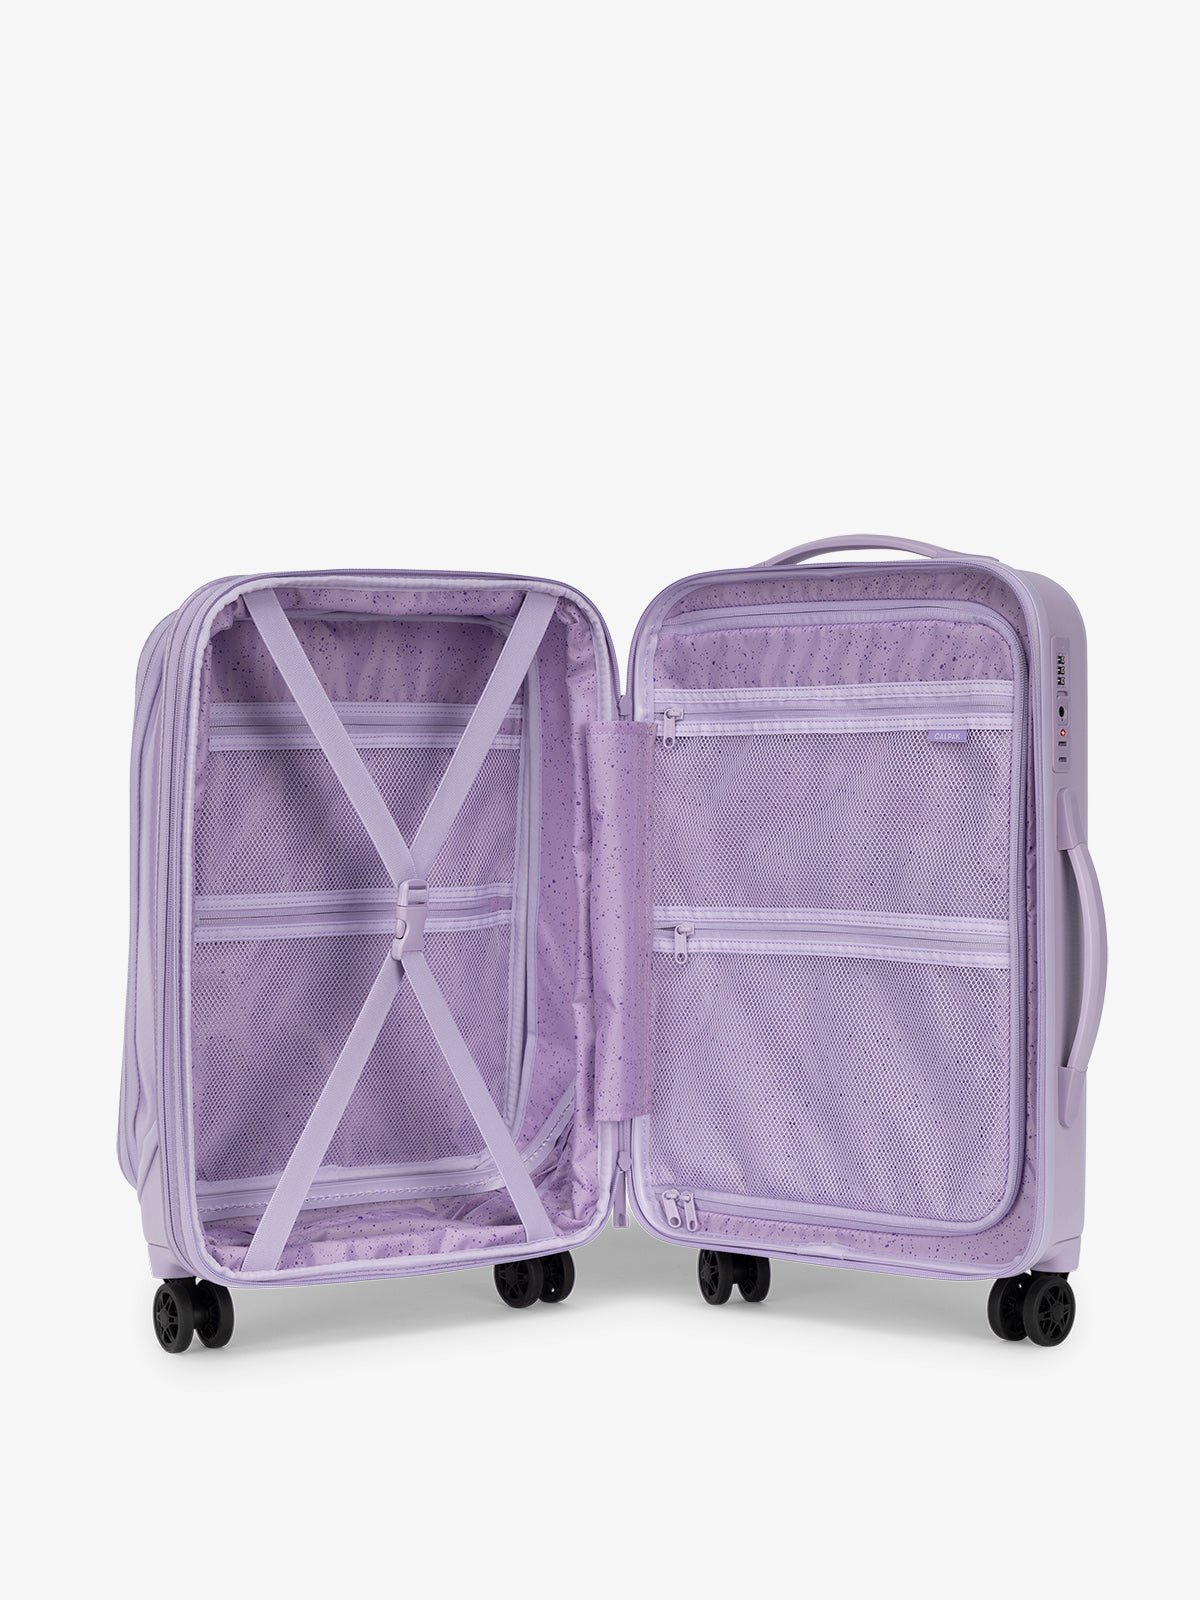 CALPAK Terra Carry-On Luggage interior with multiple zipped pockets and compression strap in purple